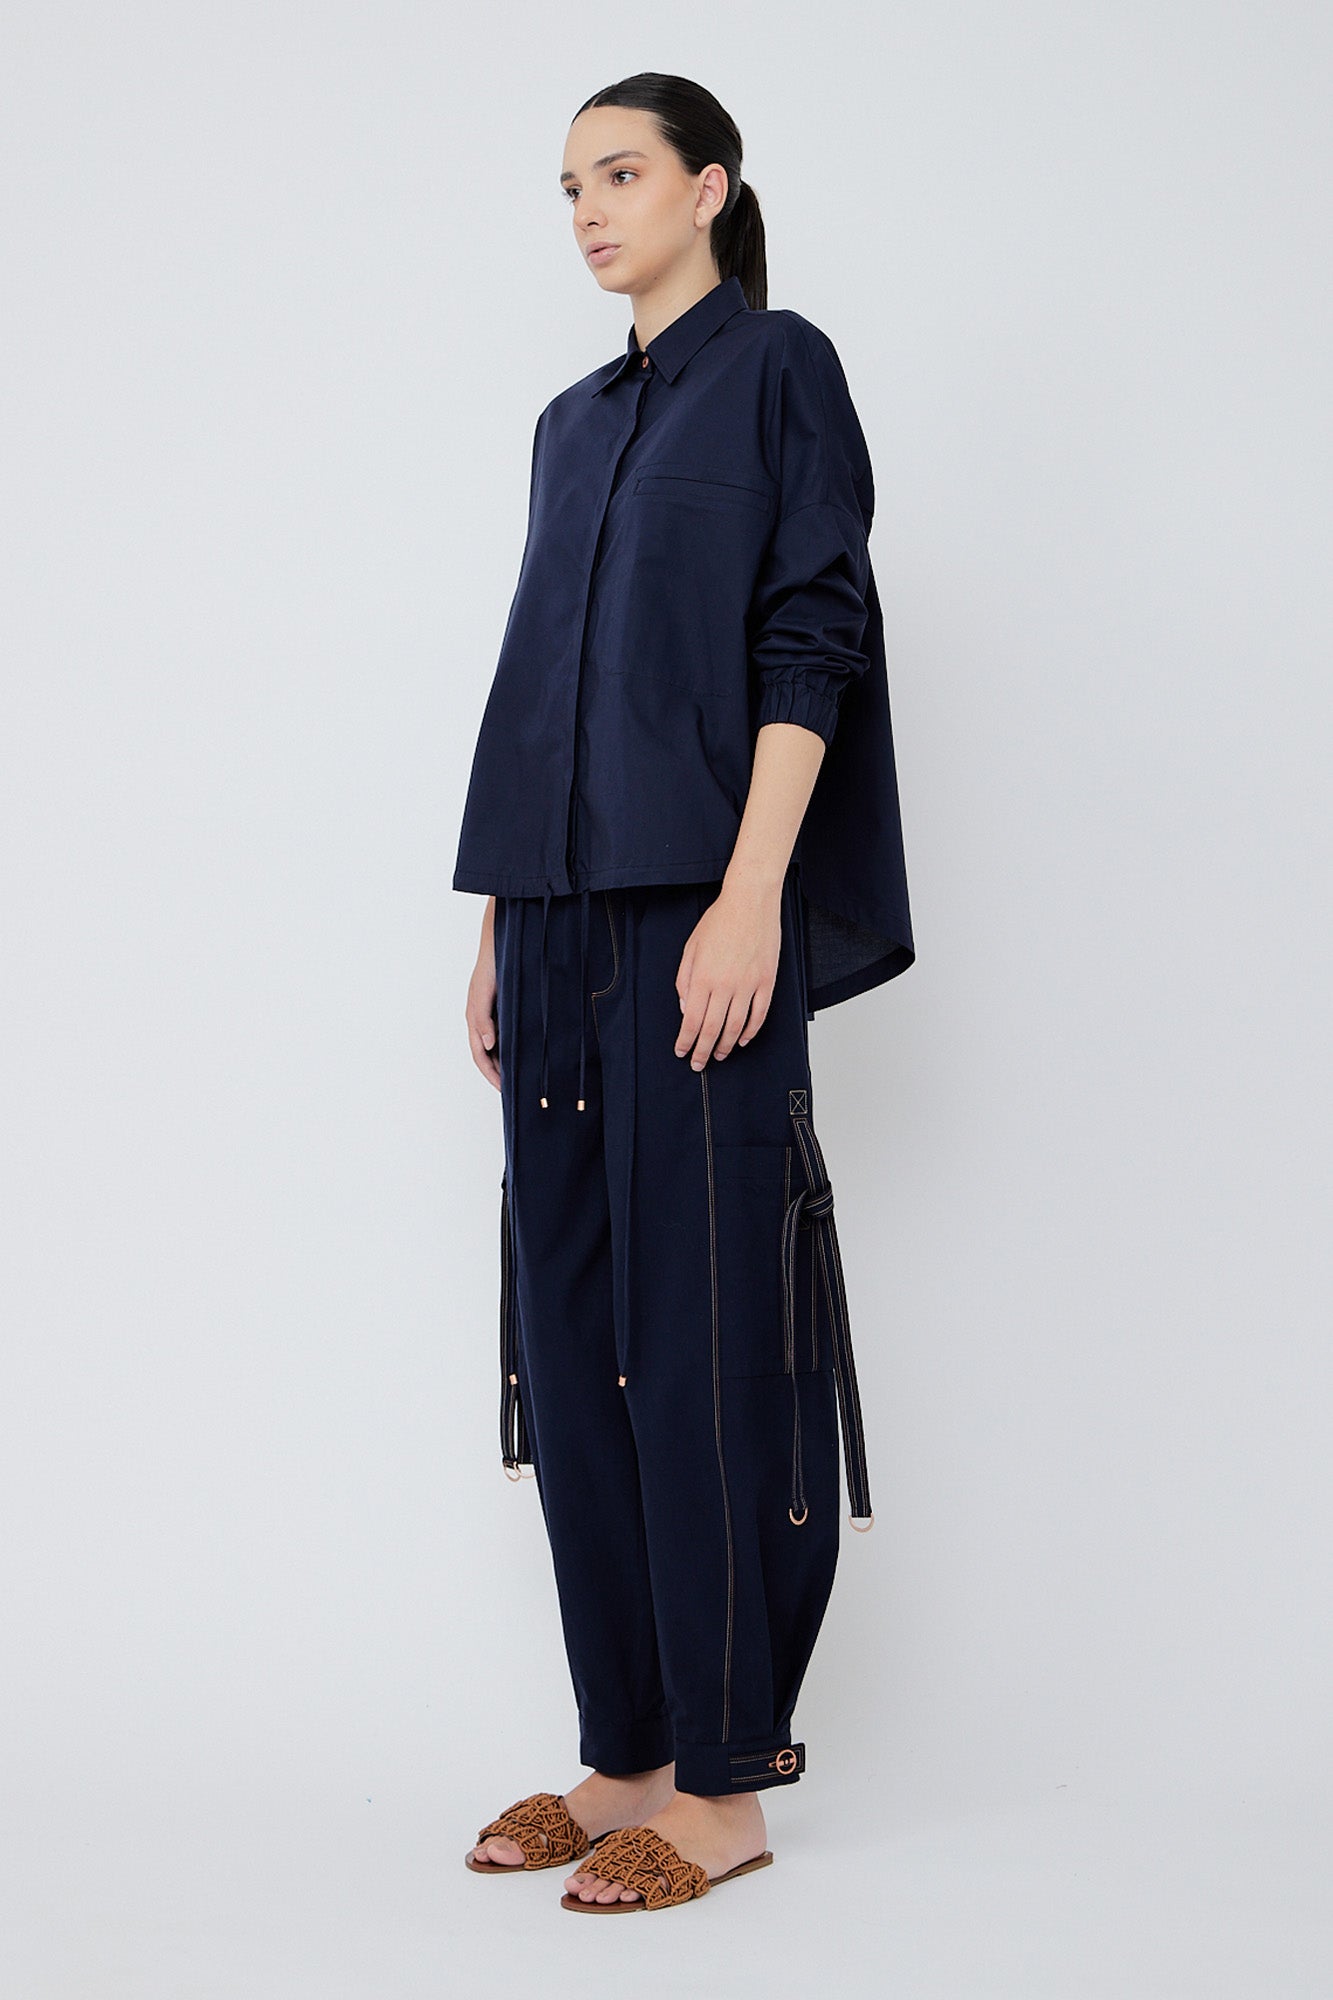 Hebe Blouse | Navy